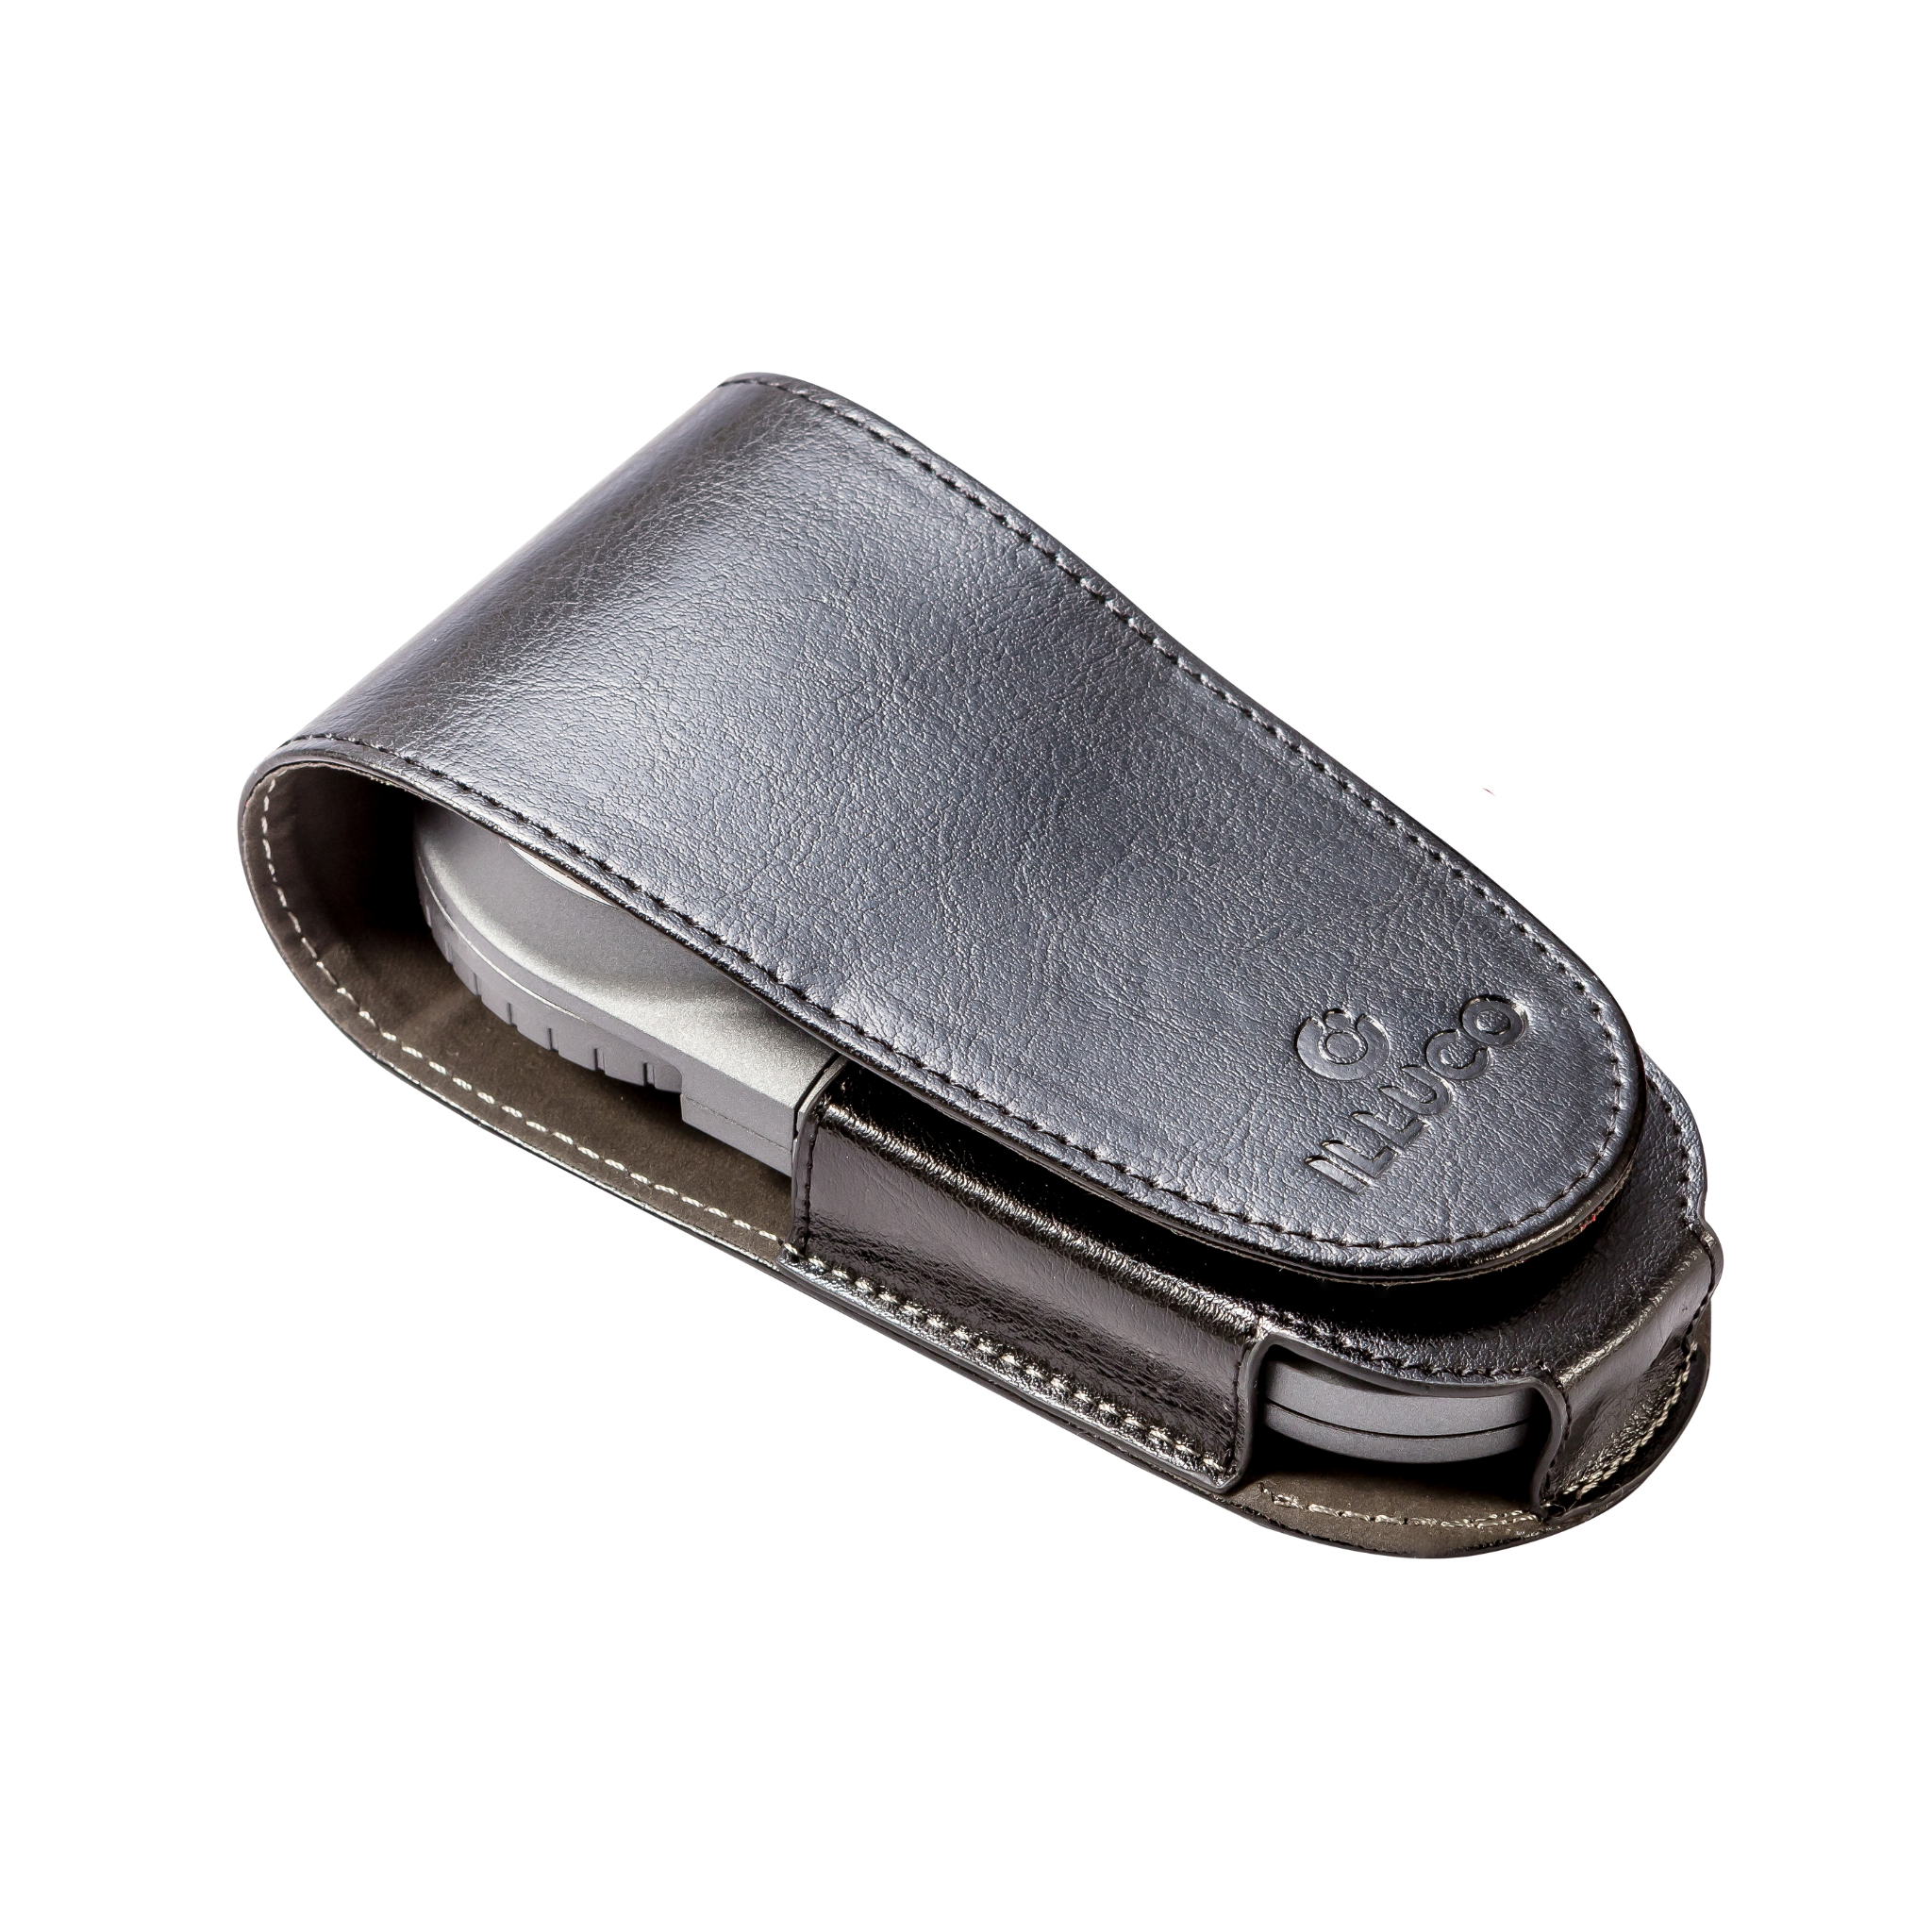 Illuco Leather Pouch in black